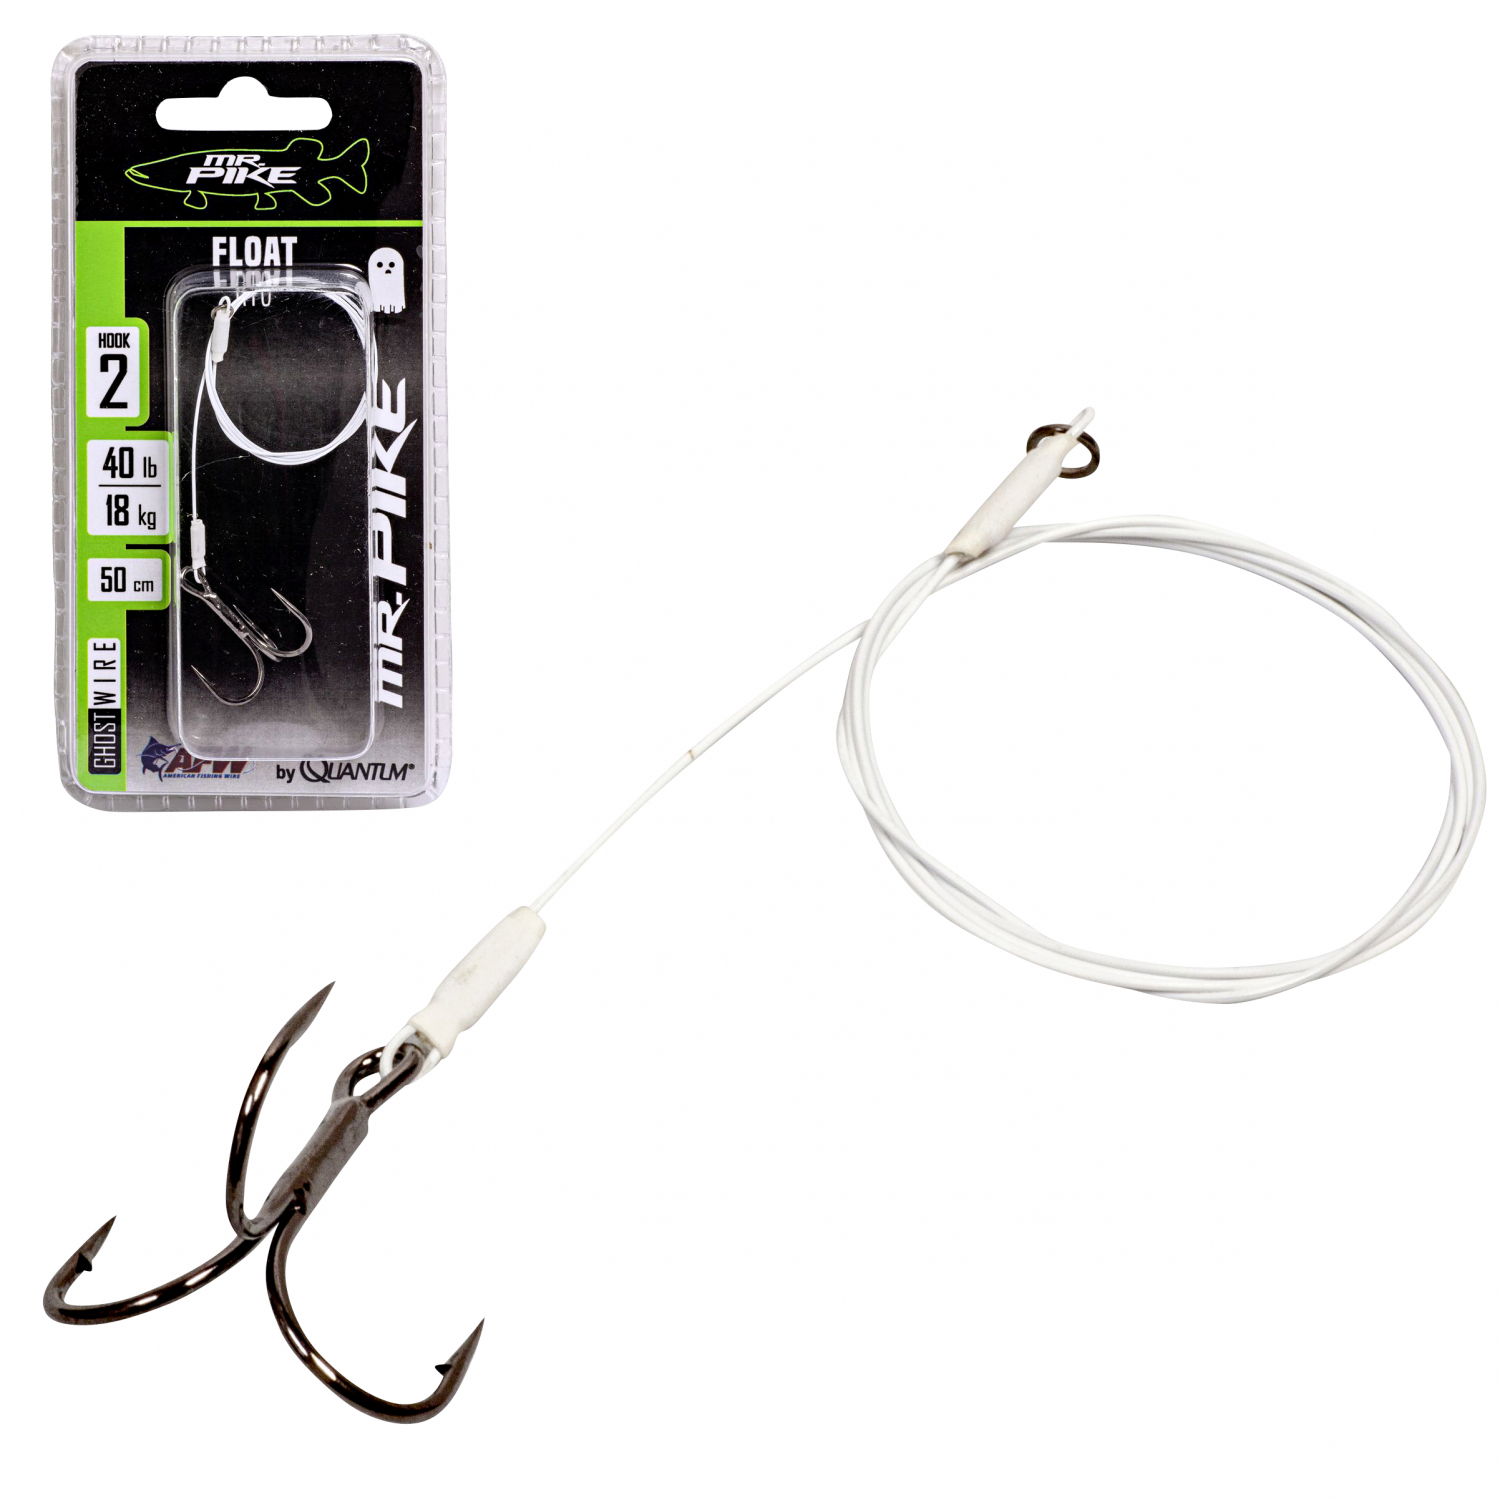 Mr. Pike Hooks Ghost Traces Float Rig 